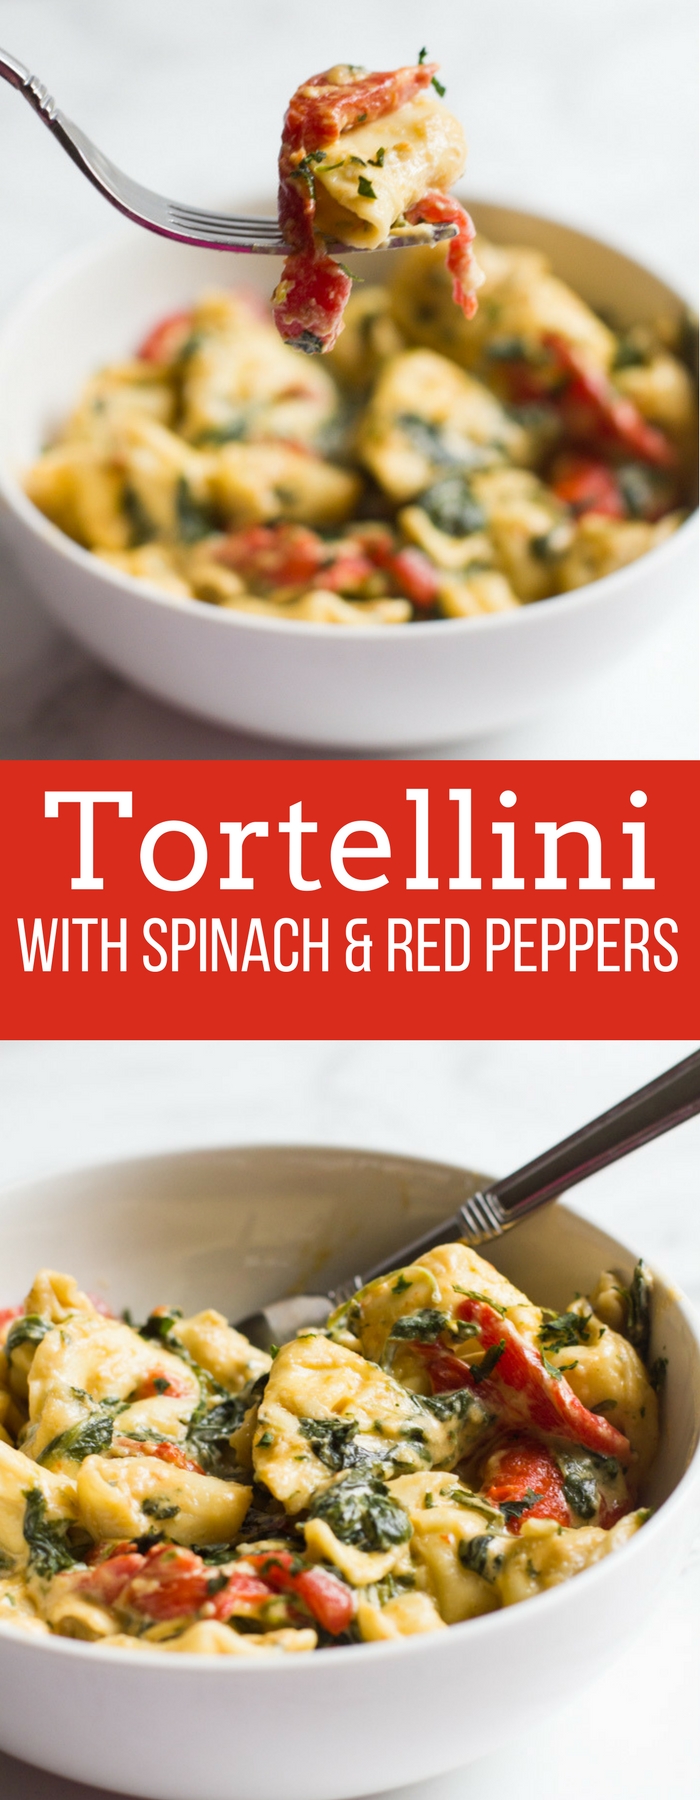 Tortellini | Roasted Red Pepper | Spinach | Tortellini with Spinach and Roasted Red Peppers | Easy | Pasta | Cheesy Tortellini | Fast Dinner